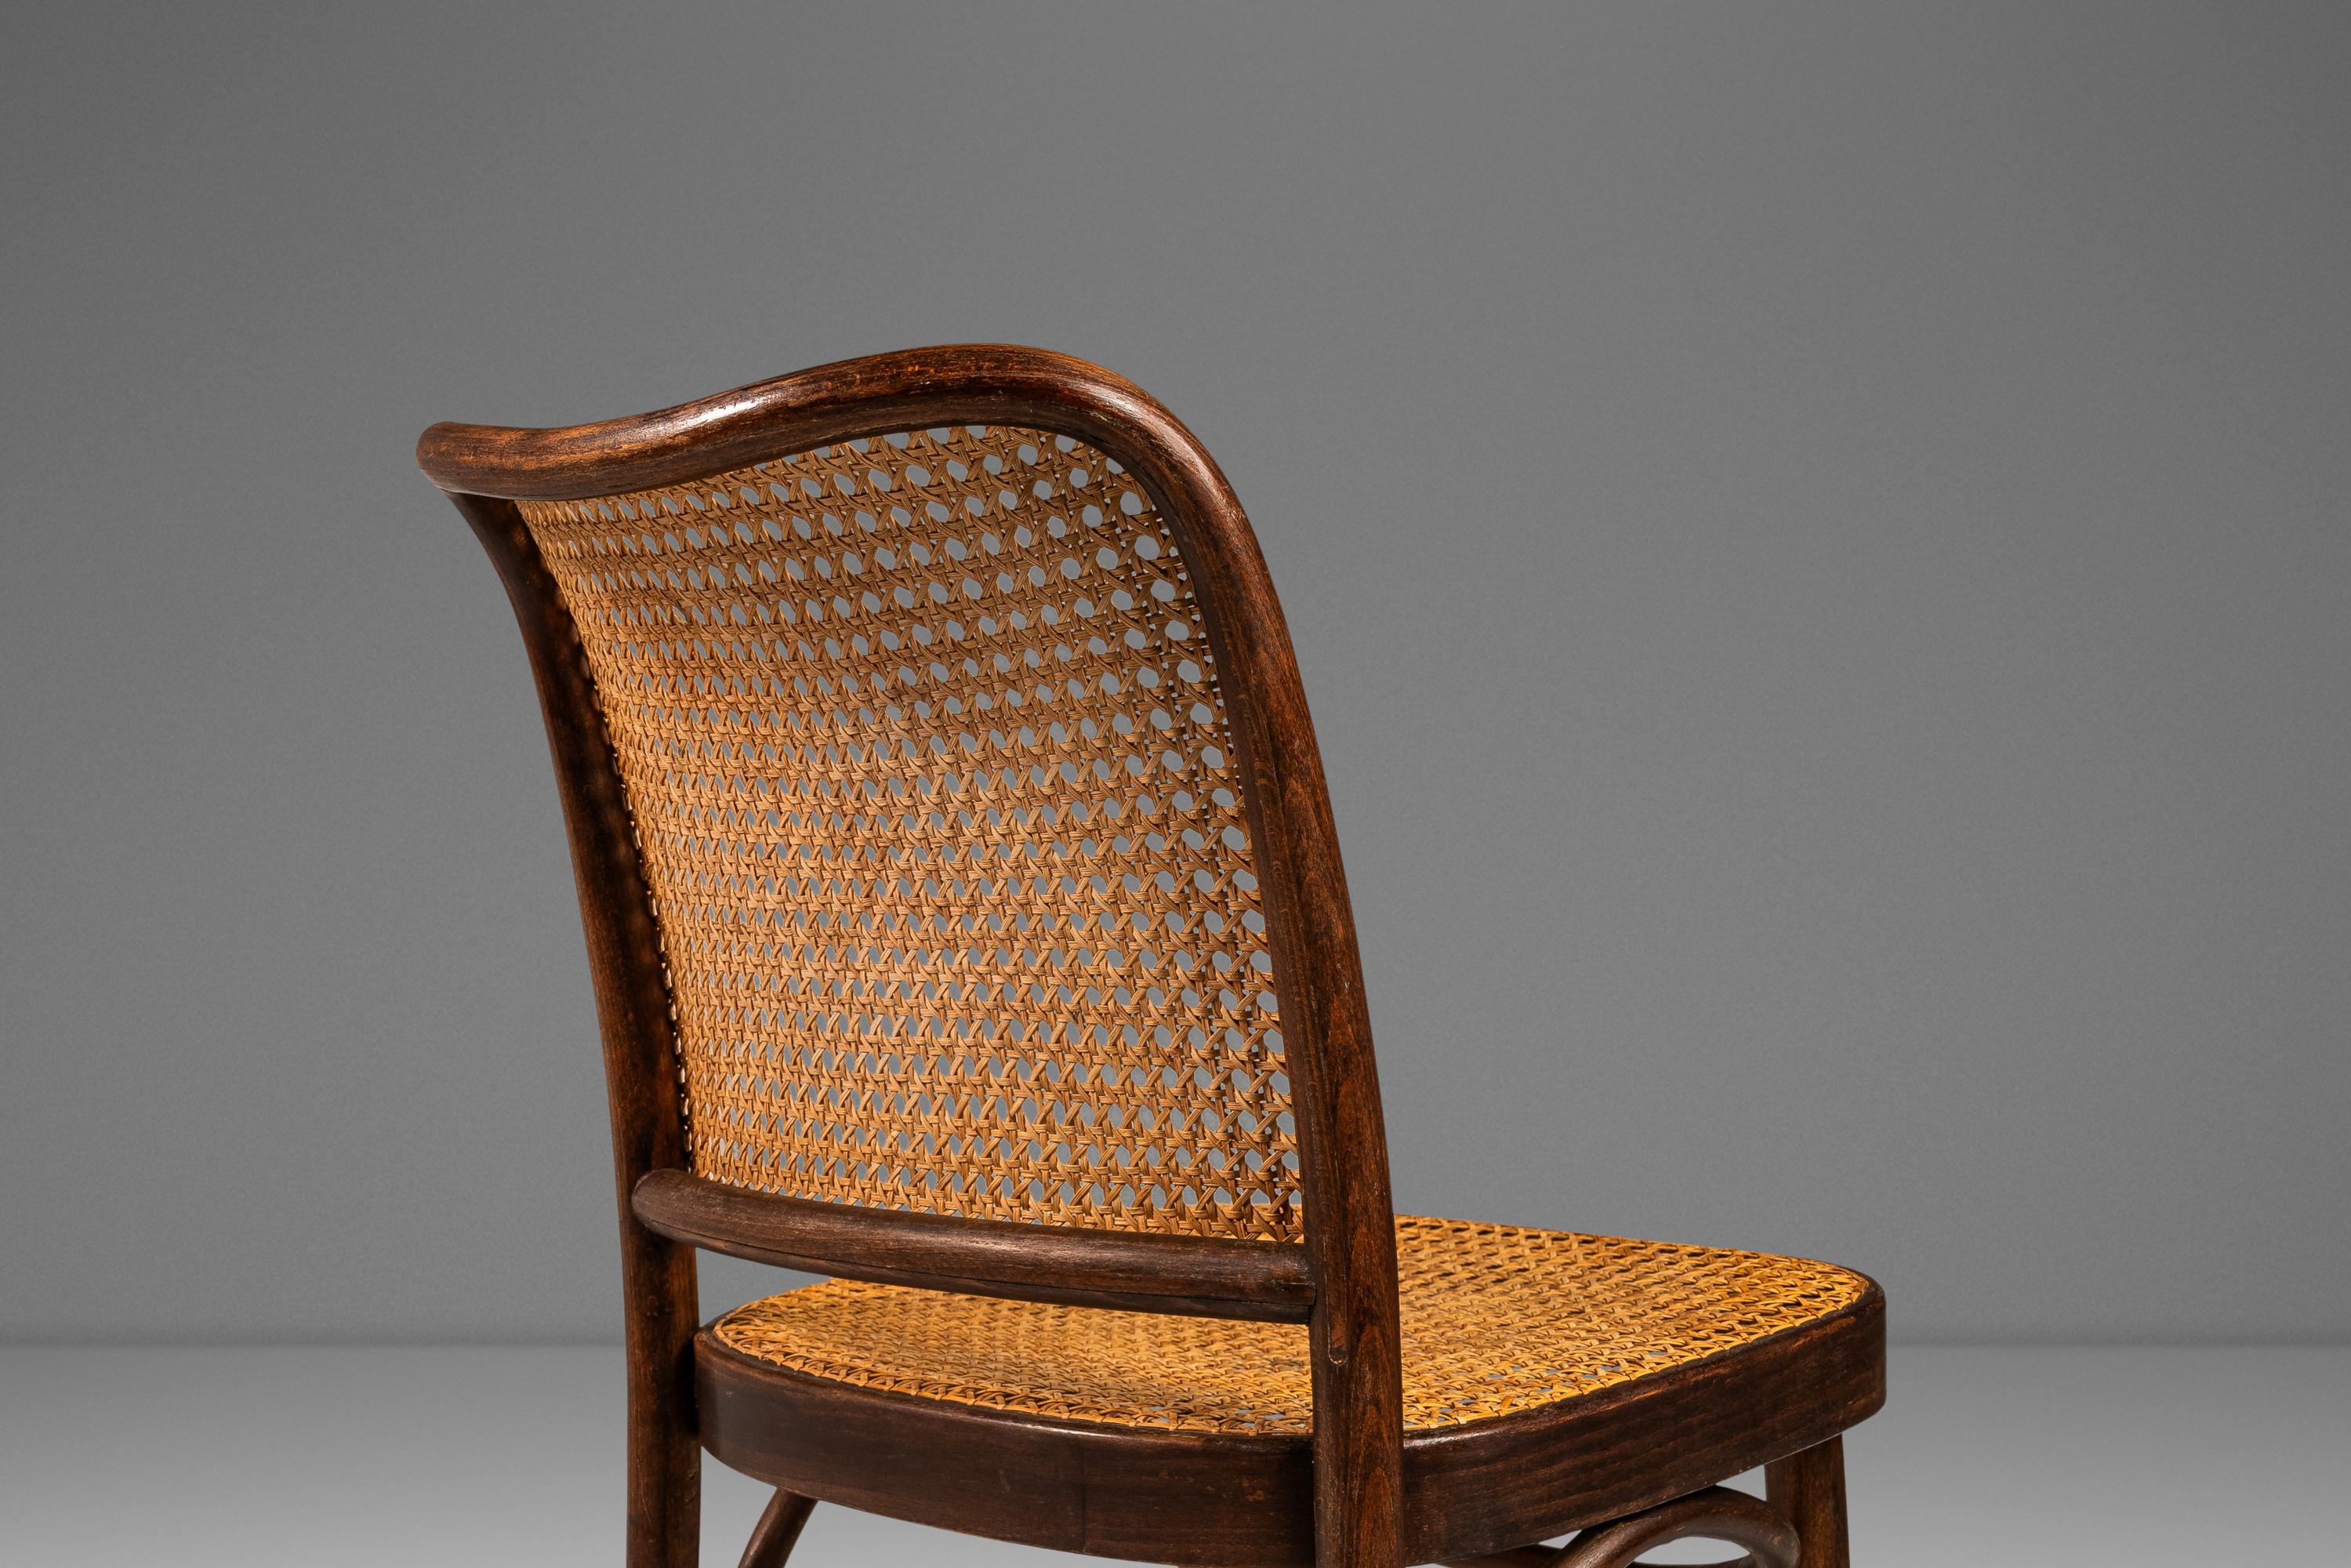 Bentwood Prague Model 811 Chair in Walnut by Josef Frank, Poland, c. 1960s For Sale 8